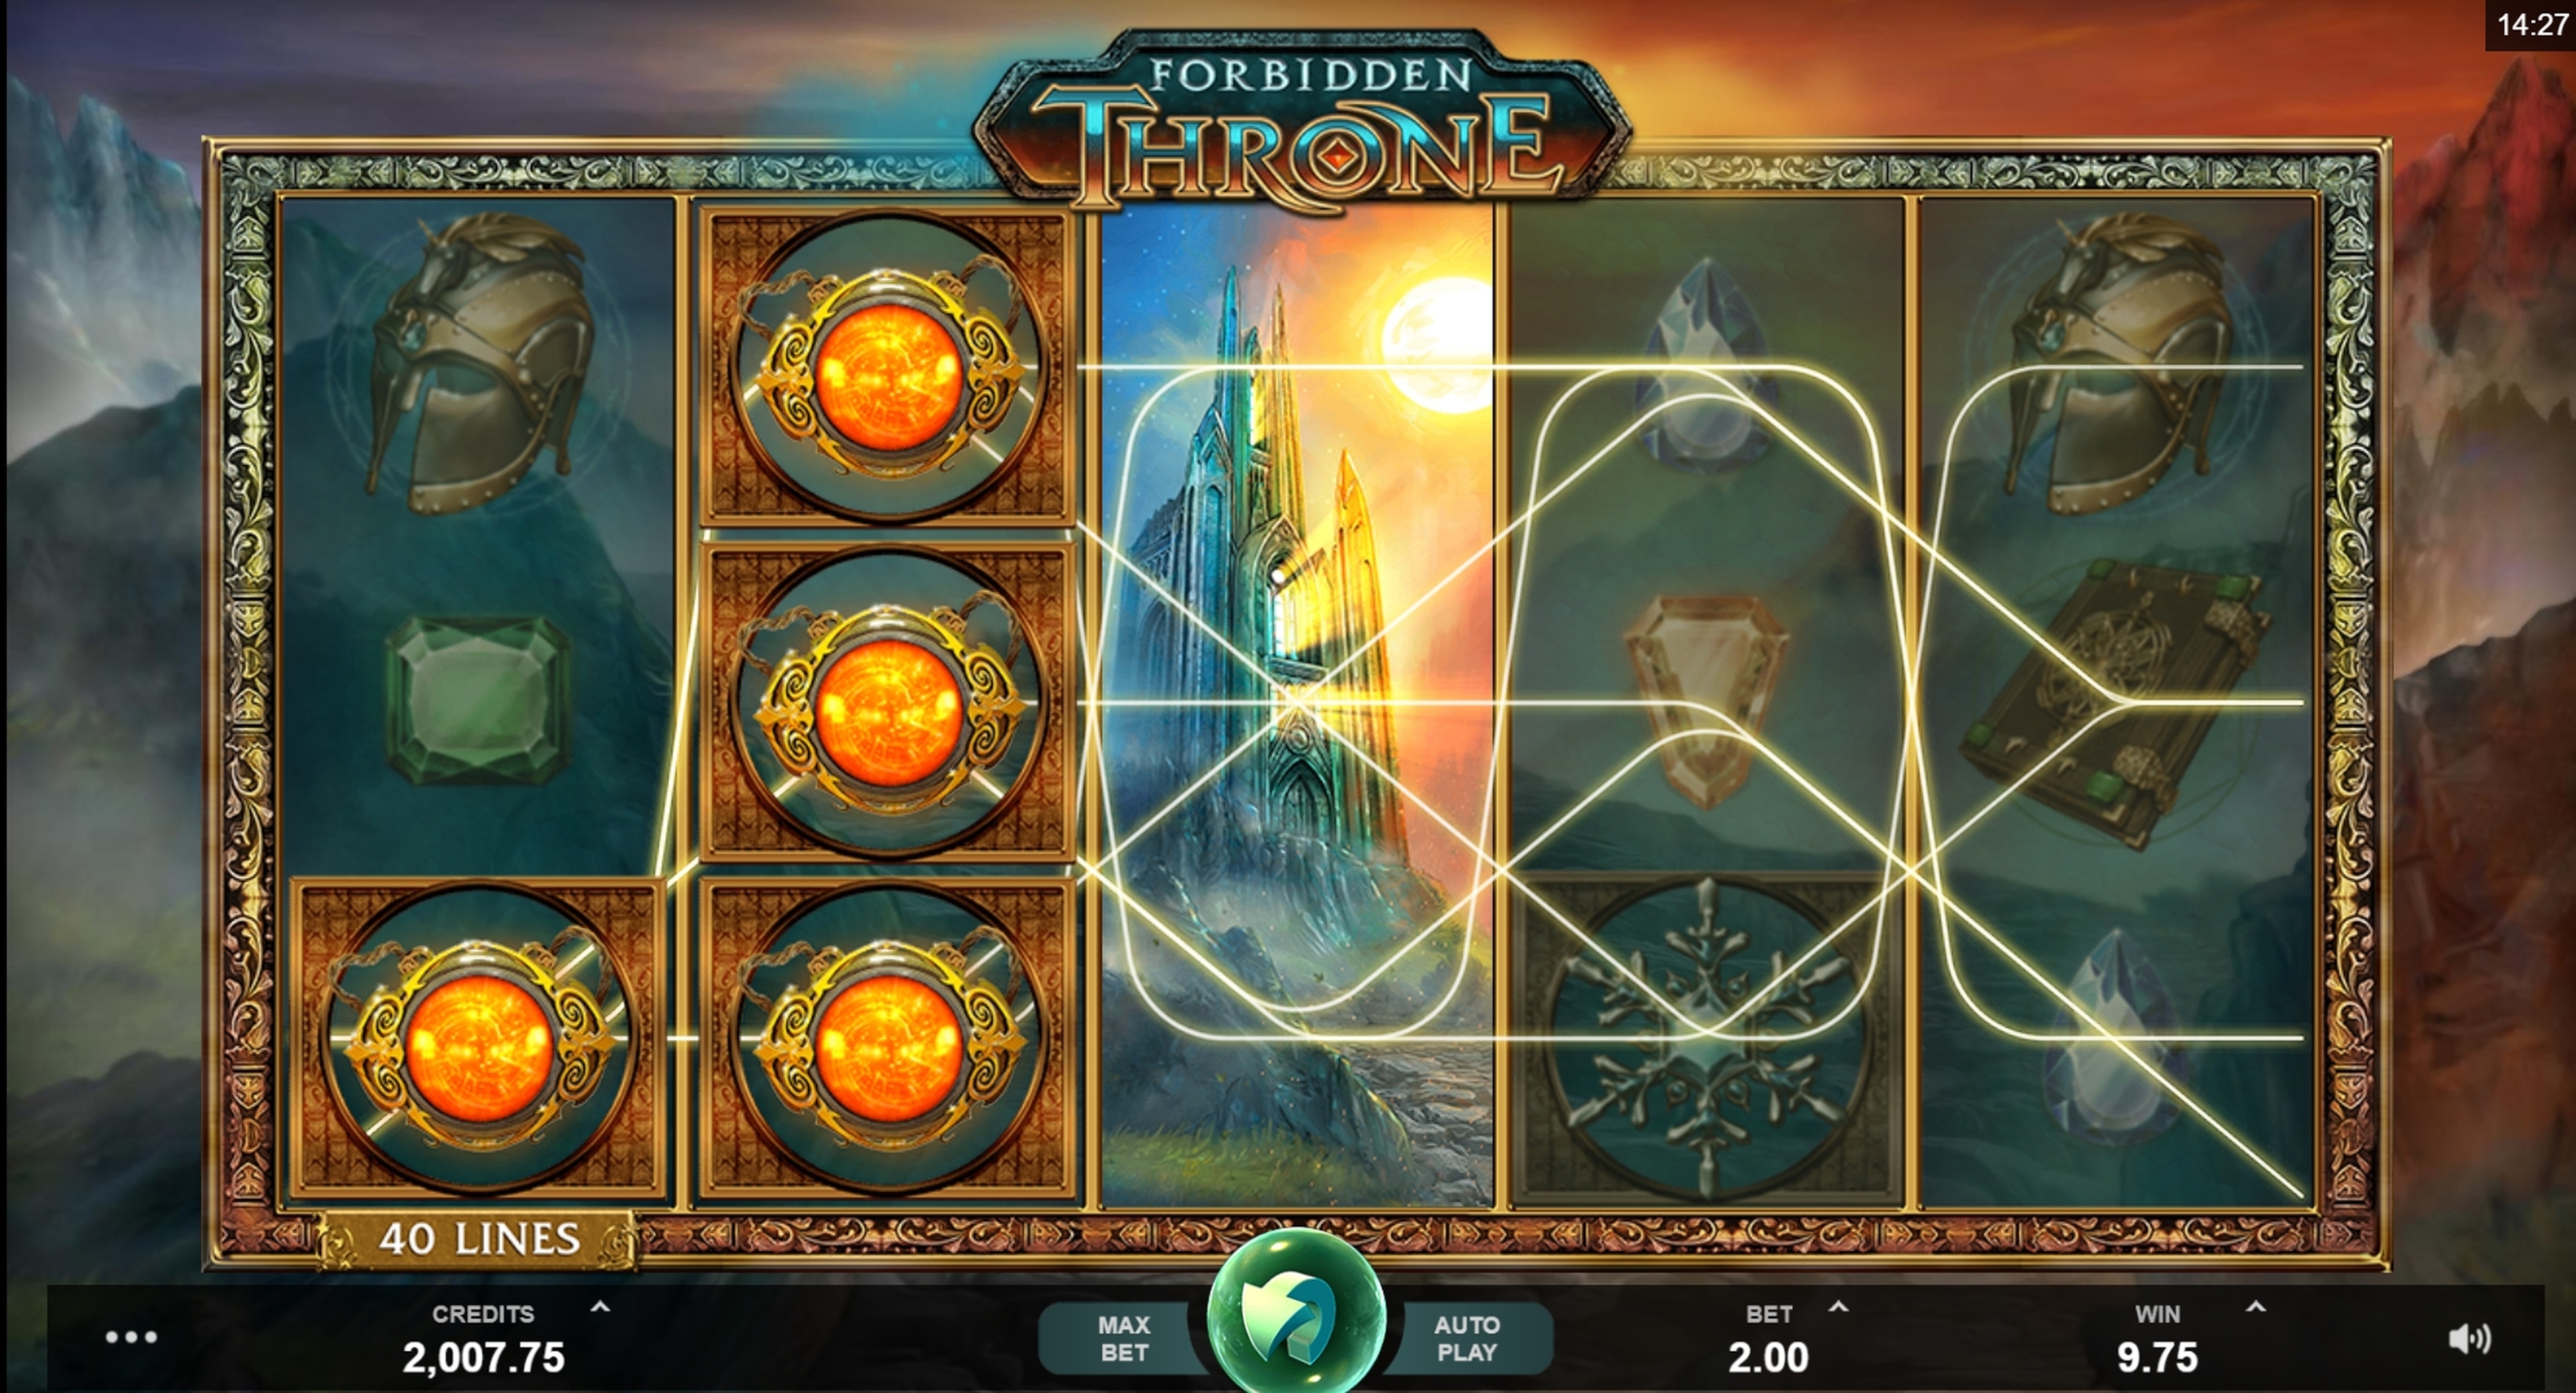 Win Money in Forbidden Throne Free Slot Game by MahiGaming